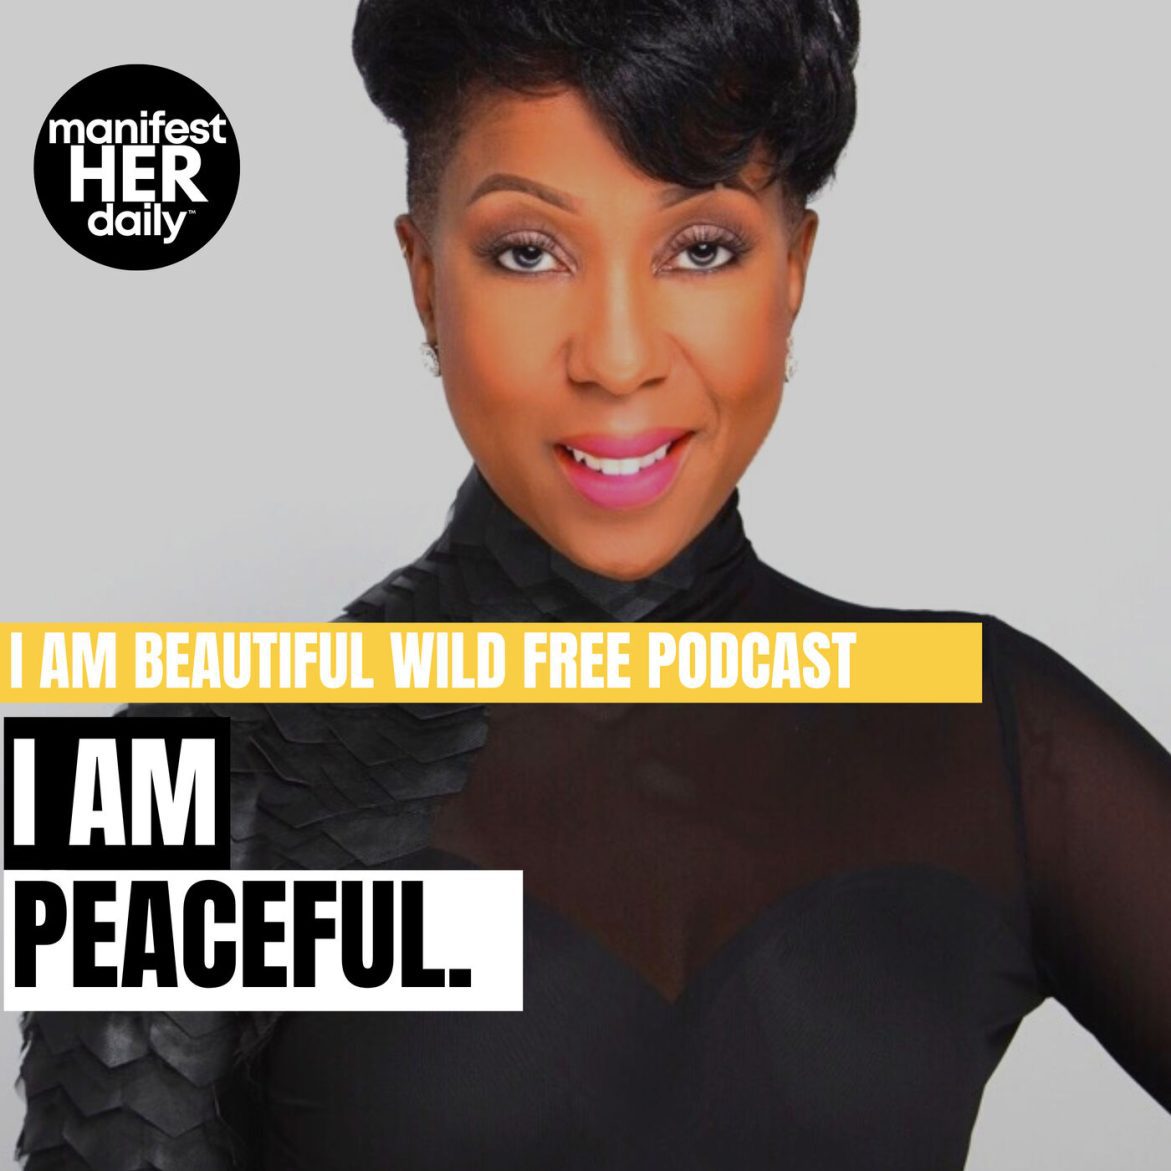 Black Podcasting - I AM PEACEFUL: A Guided Meditation and Affirmation Podcast